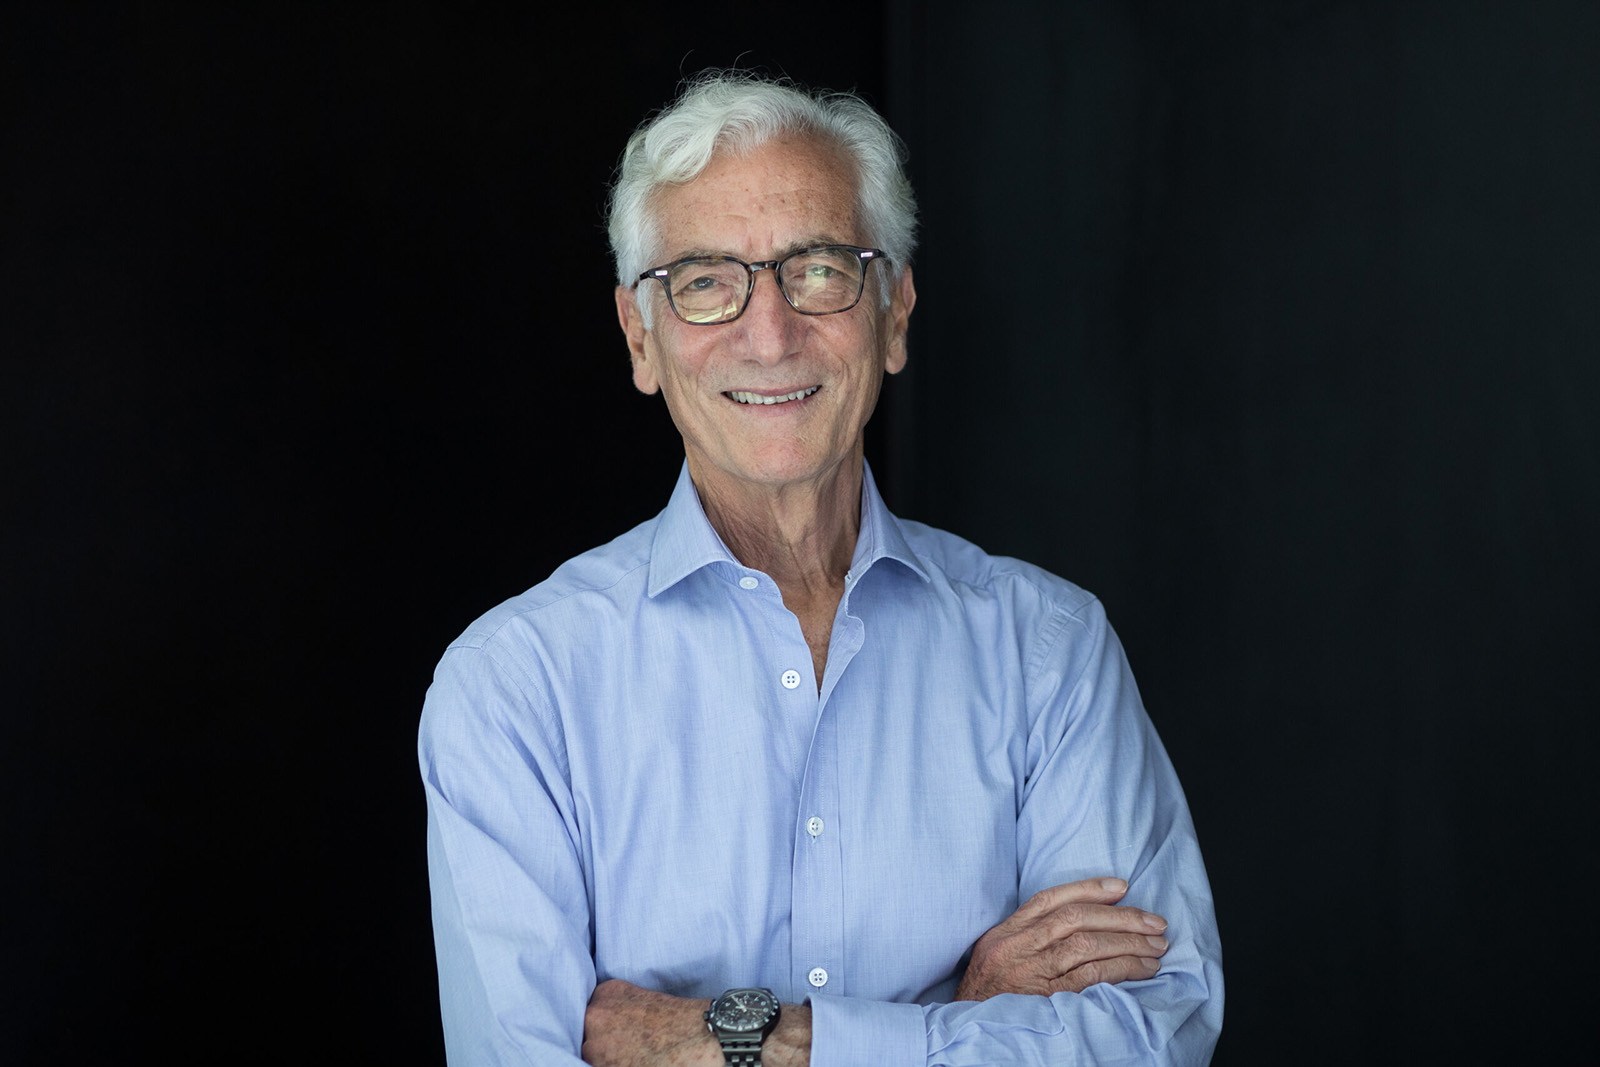 Sir Ronald Cohen: The True Superhero of Impact Investment